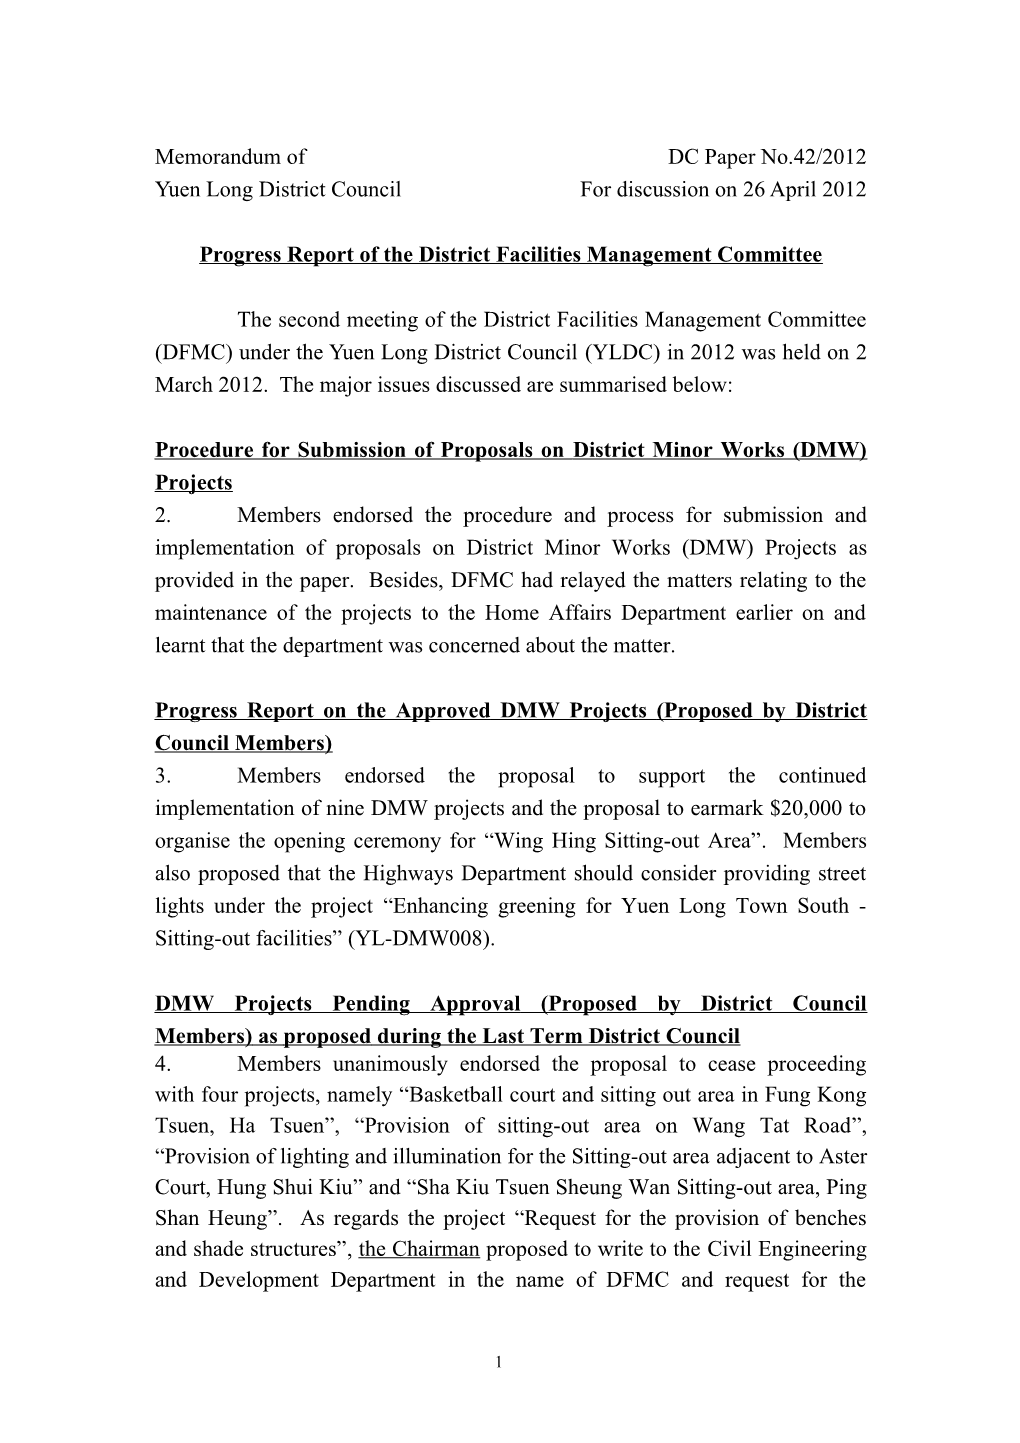 Progress Report of the District Facilities Management Committee